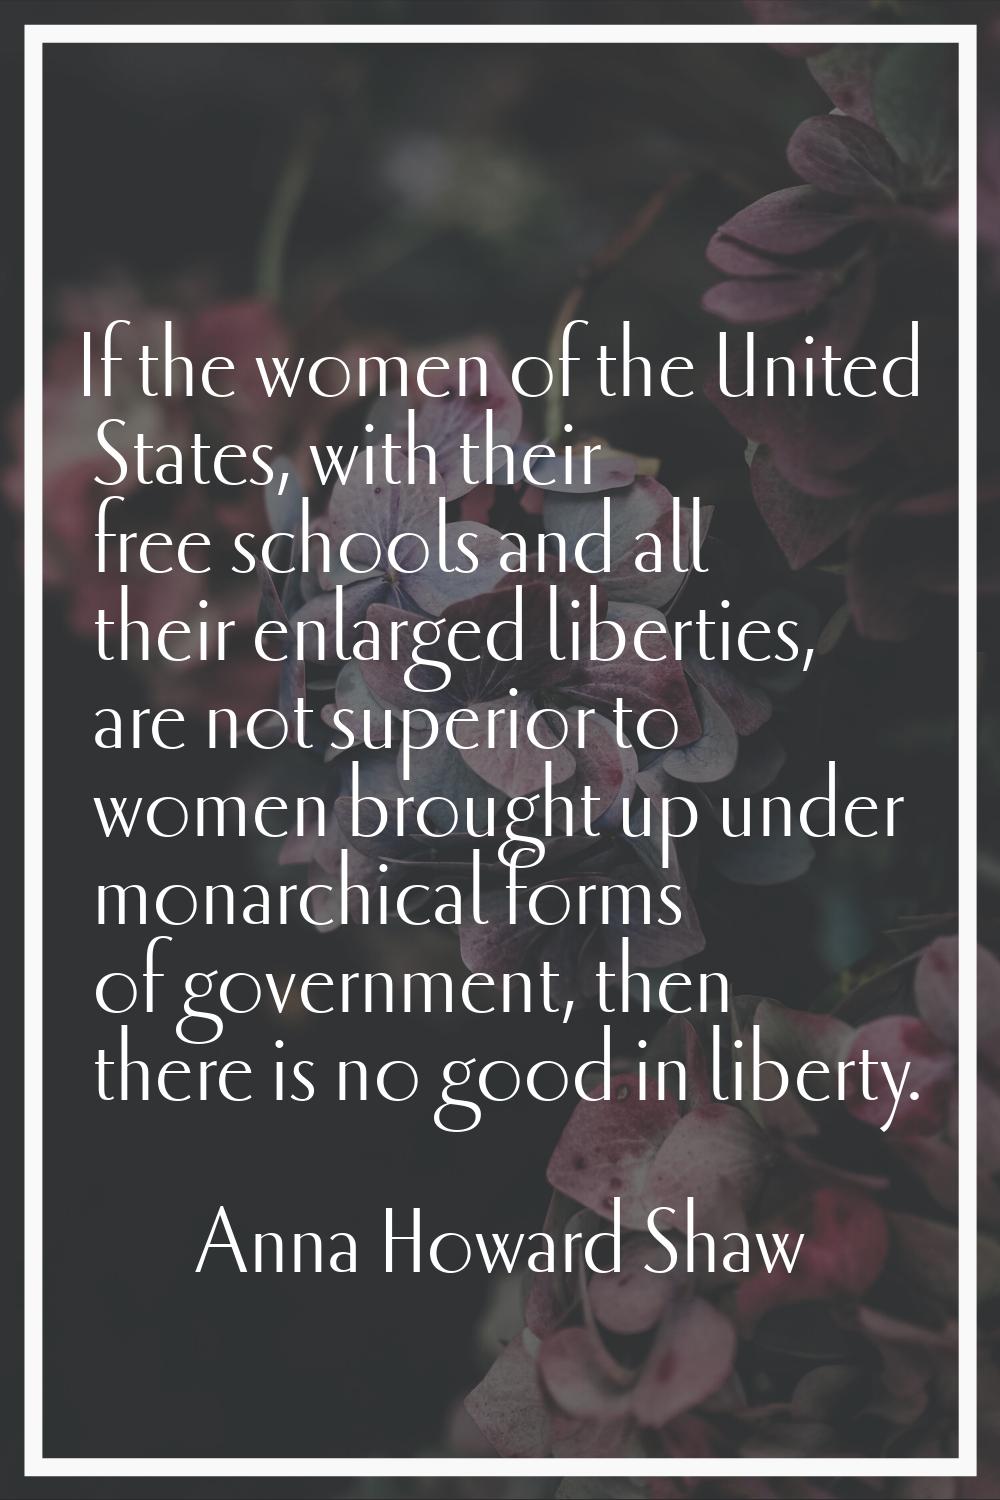 If the women of the United States, with their free schools and all their enlarged liberties, are no